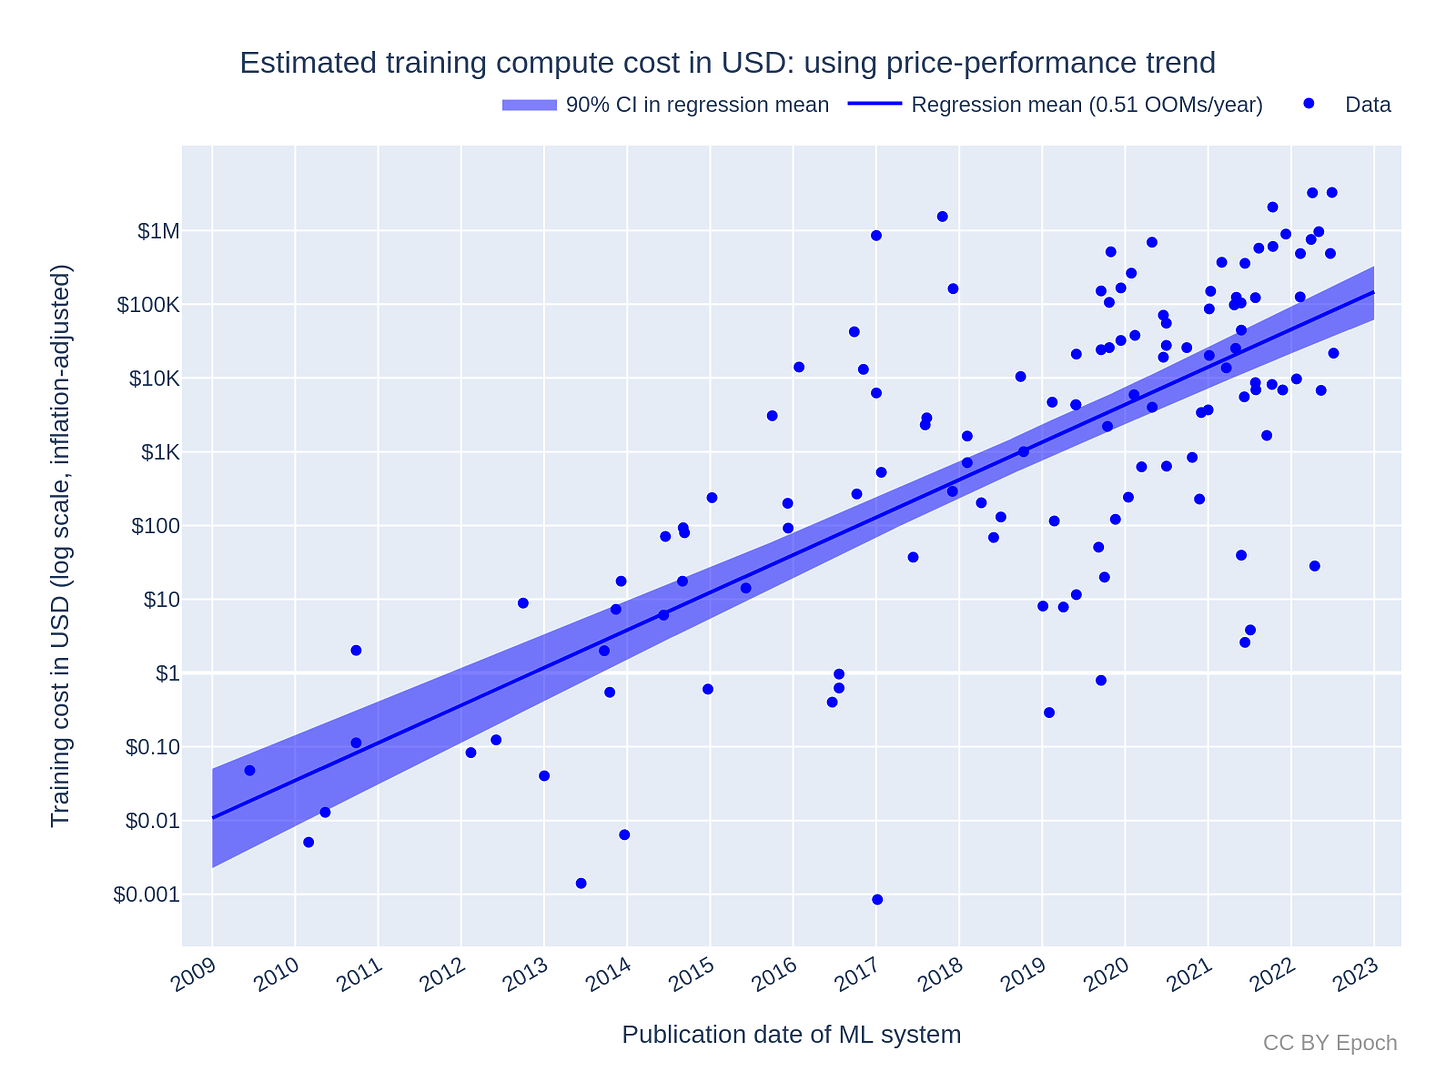 Trends in the dollar training cost of machine learning systems